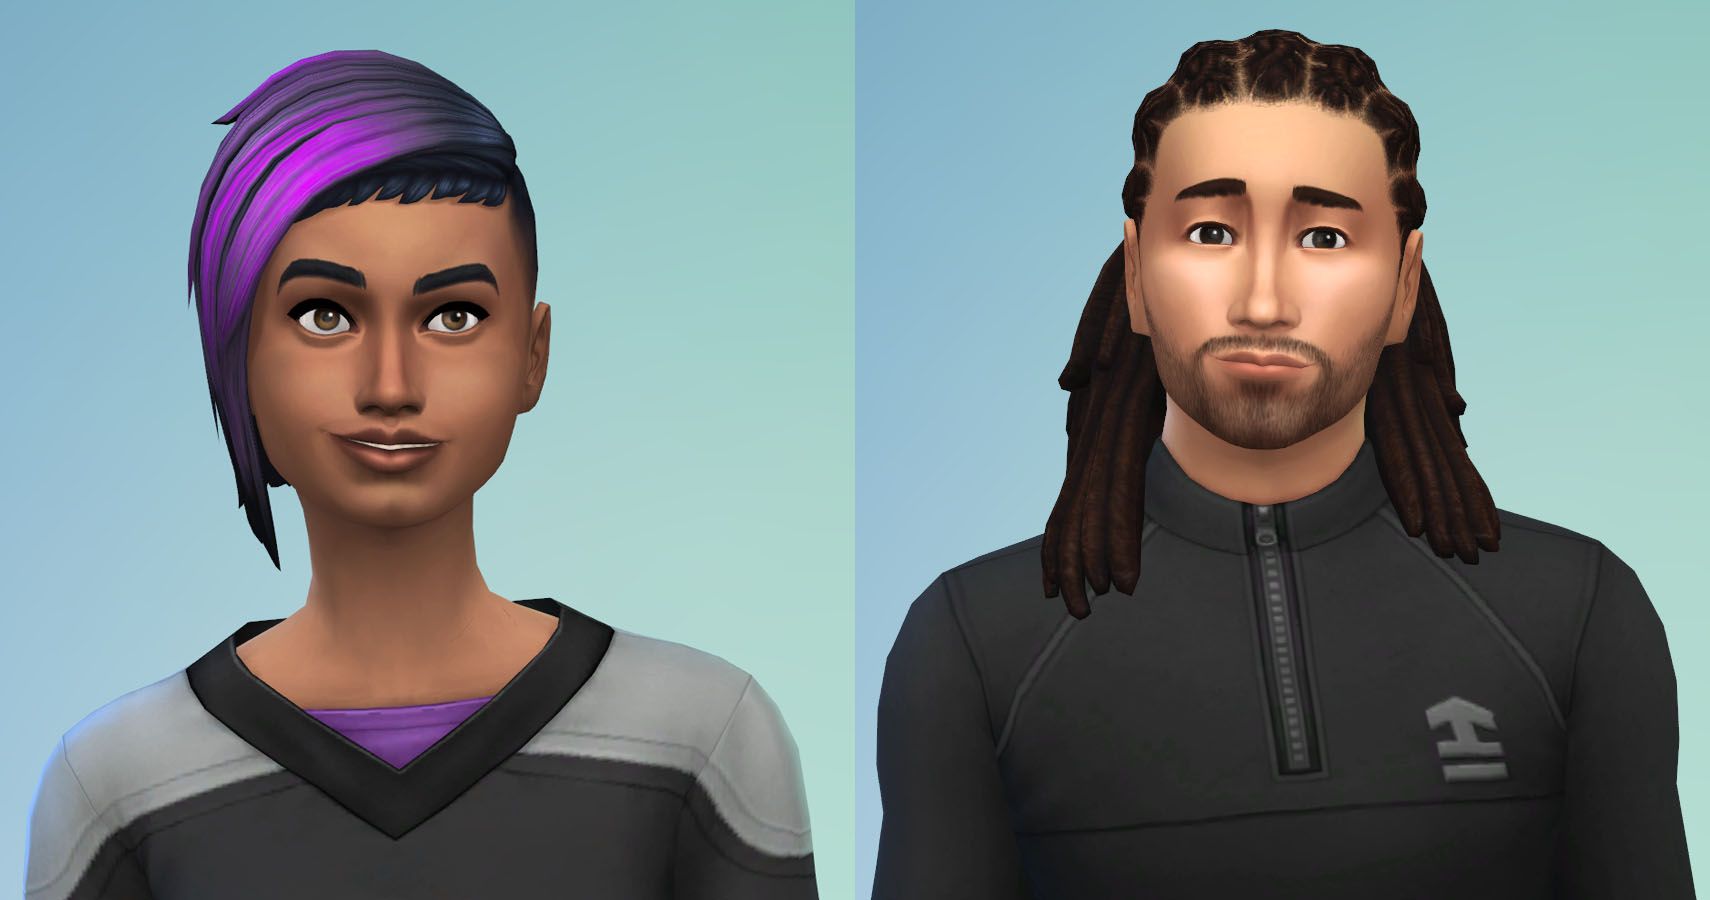 Community Blog: Get Fit with The Sims 4 Fitness Stuff Pack!